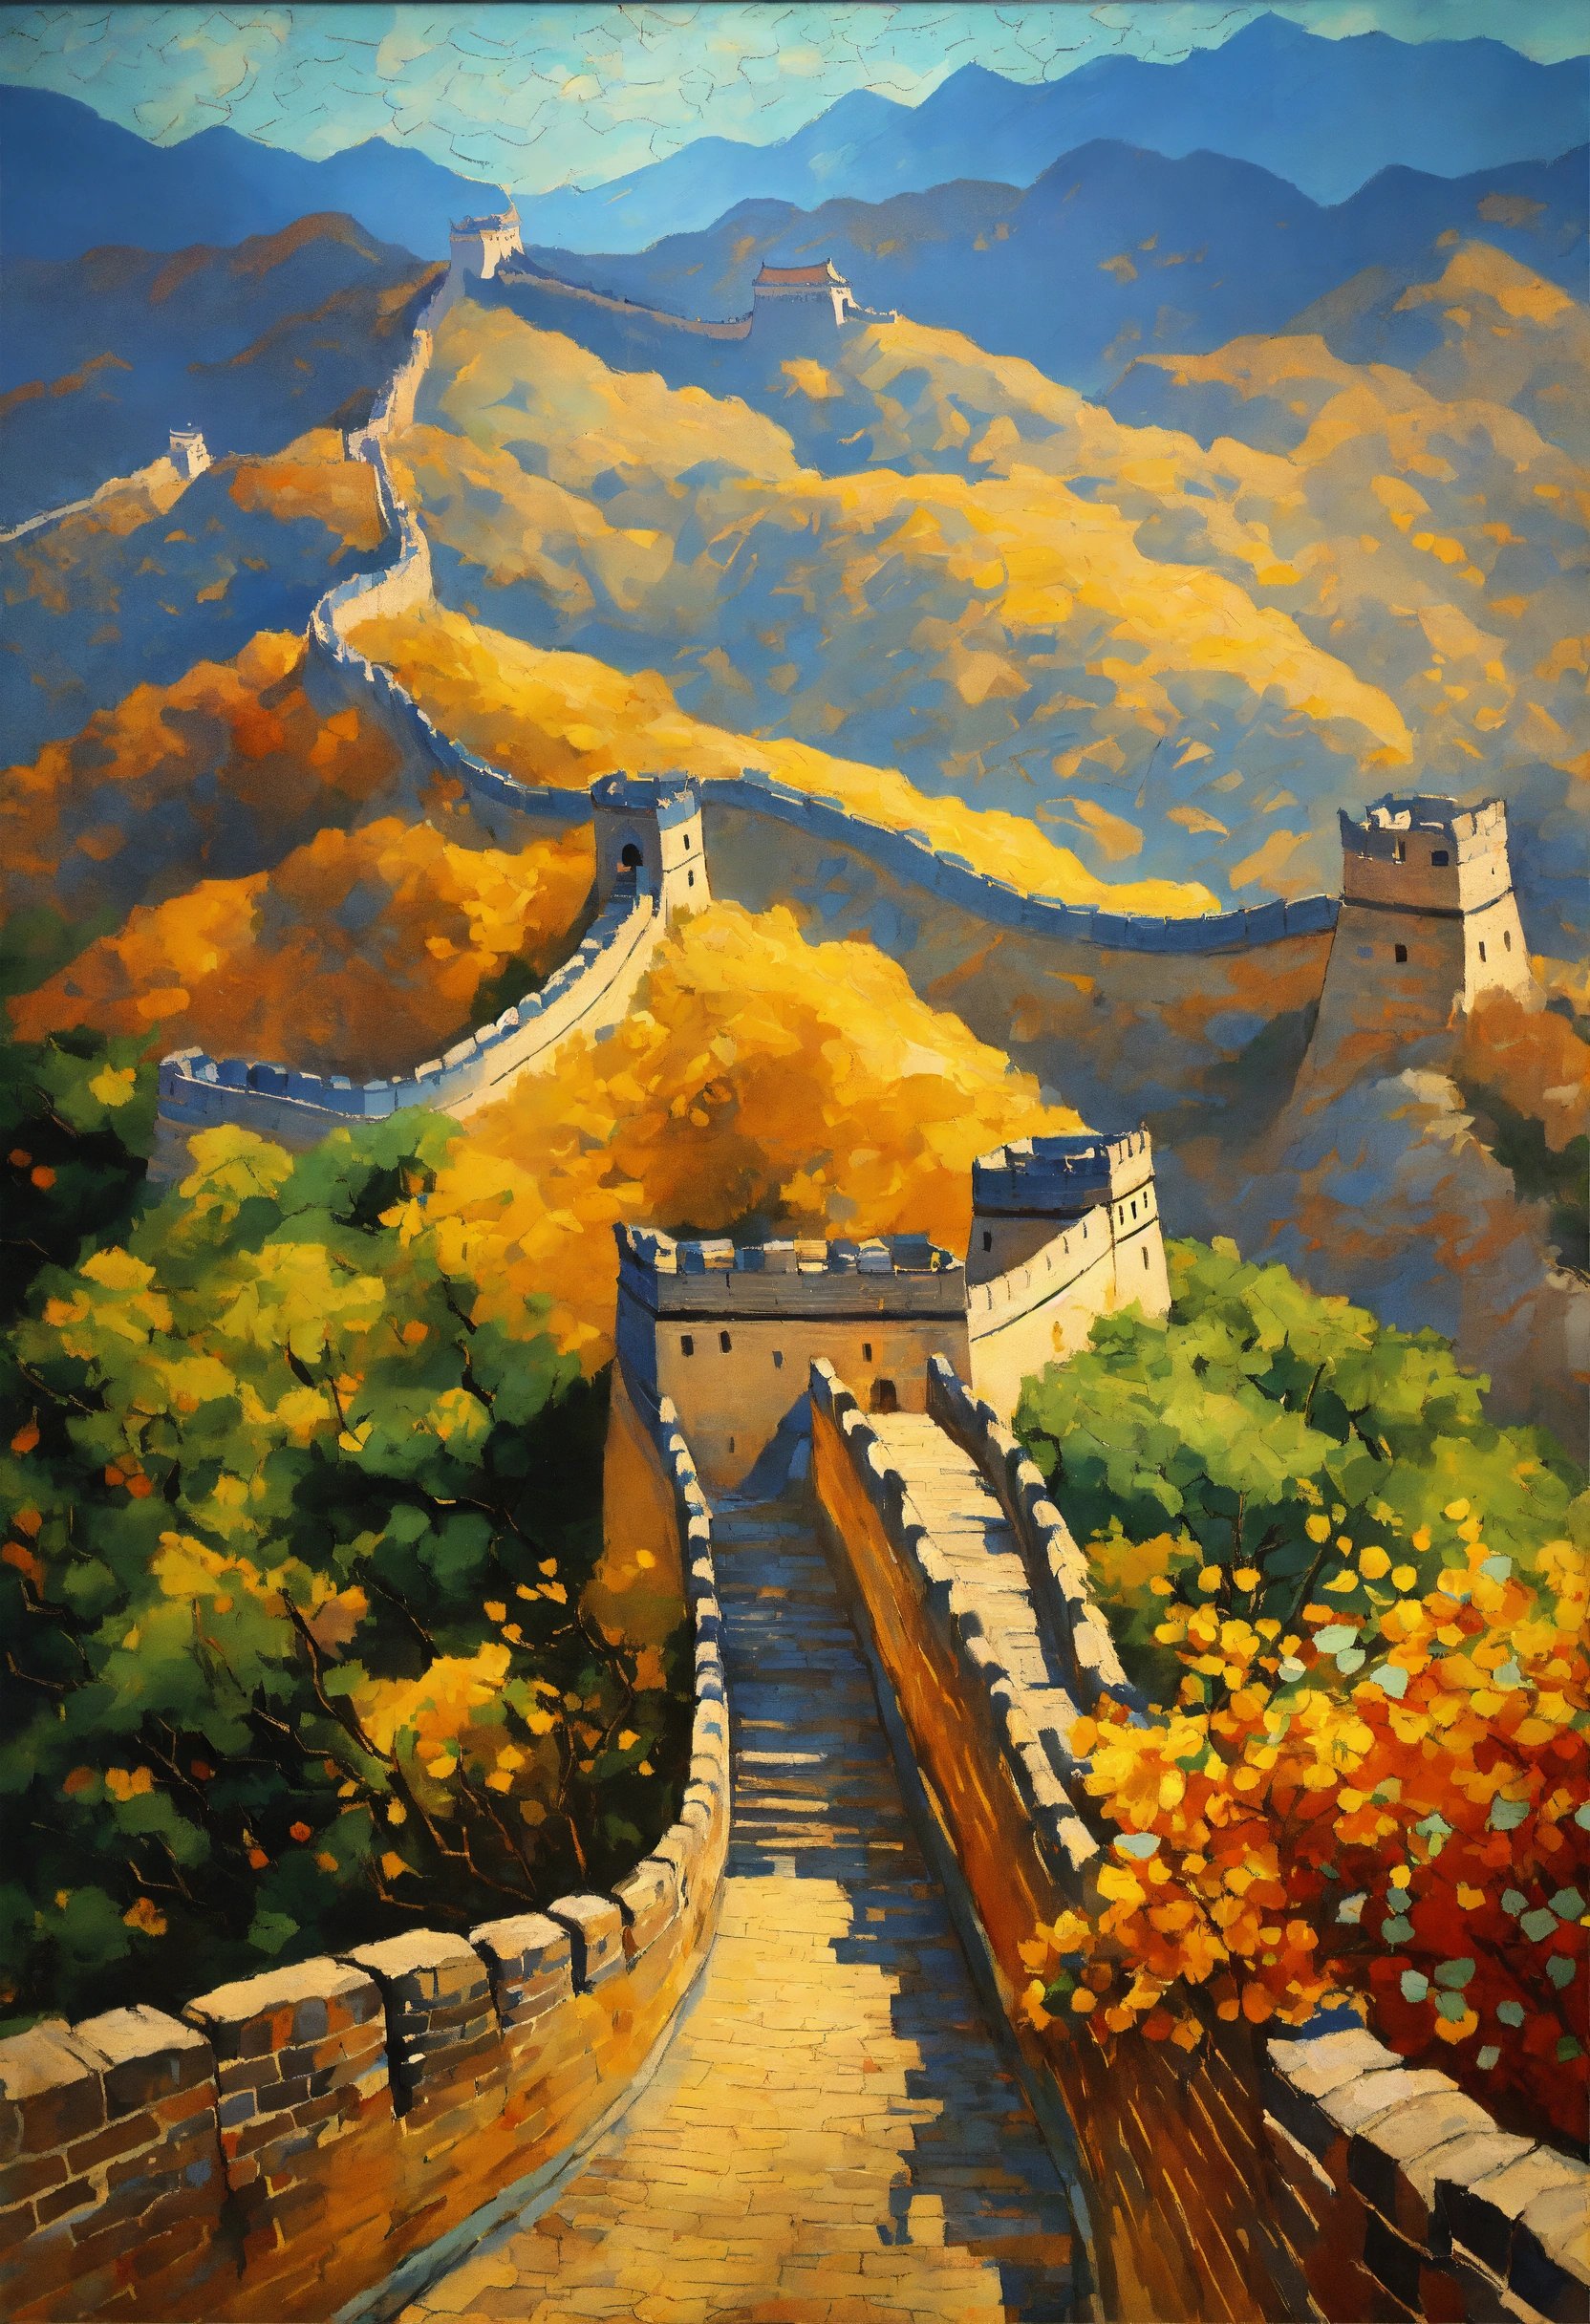 Paint me a picture of the Great Wall of China in t.jpg